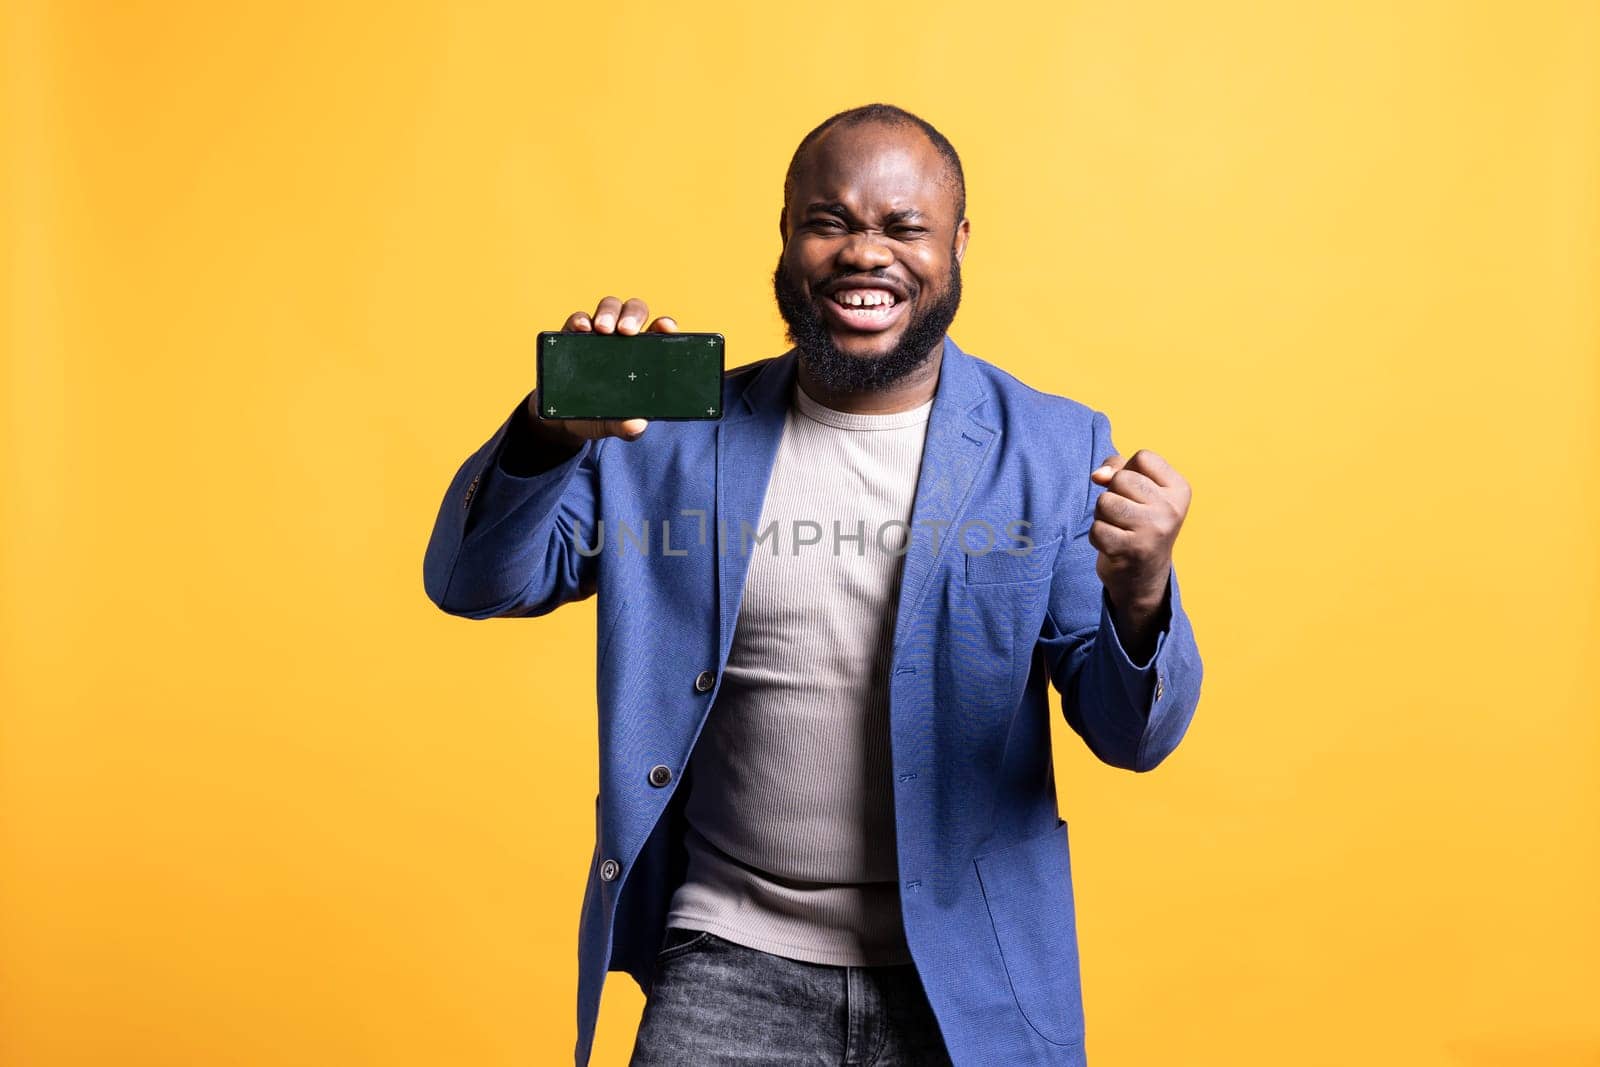 Man excitedly celebrating while presenting mockup phone, studio background by DCStudio